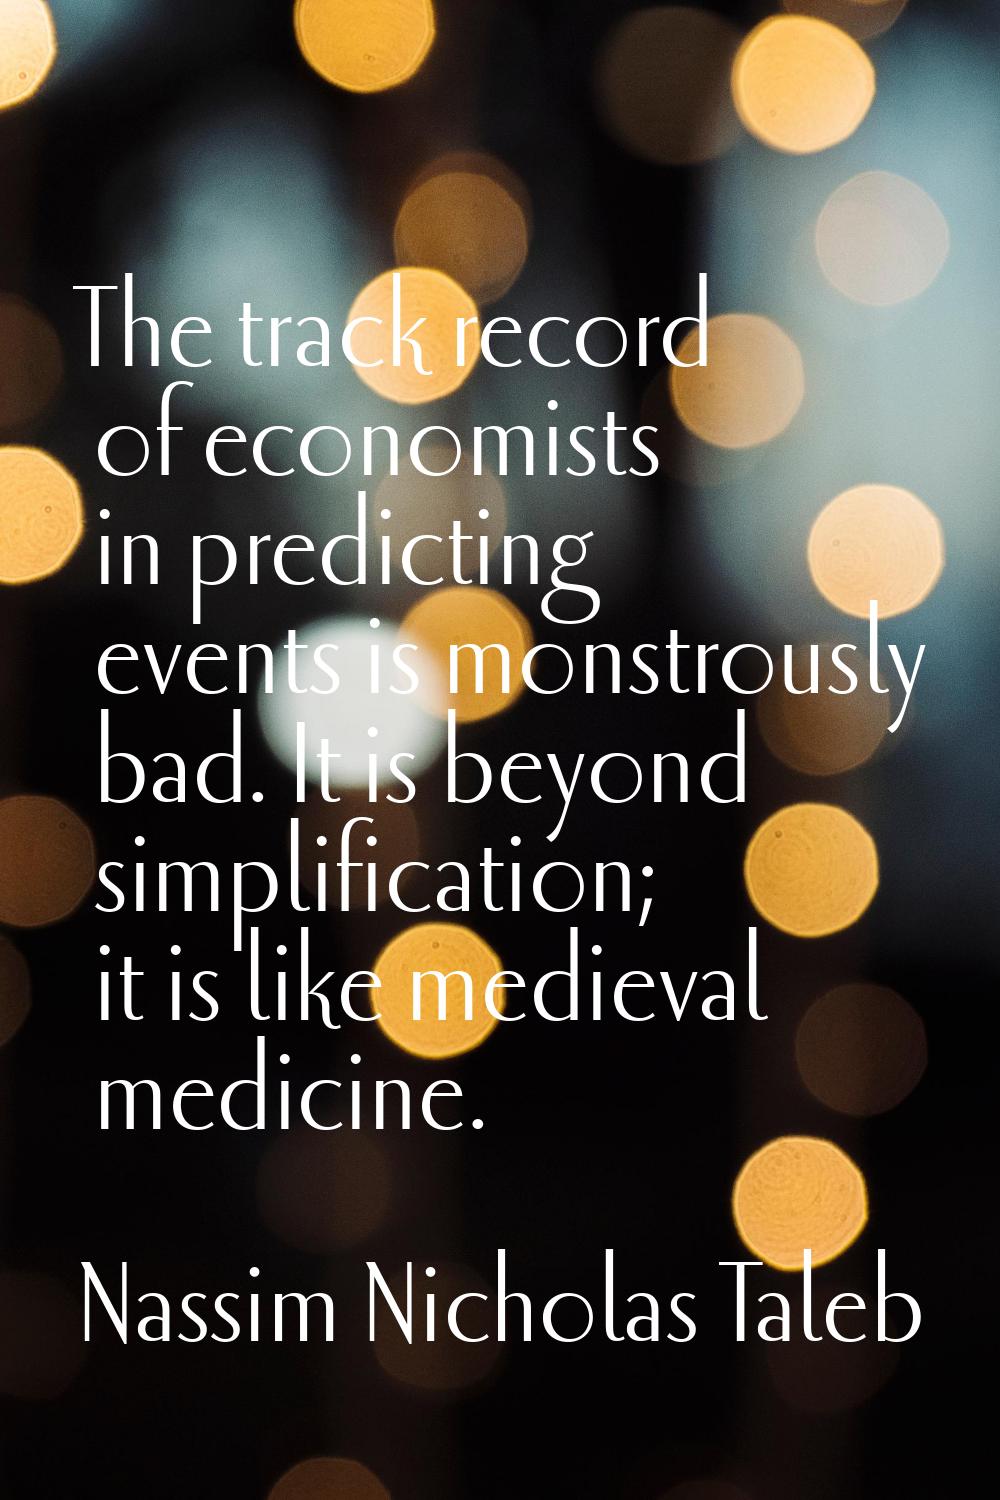 The track record of economists in predicting events is monstrously bad. It is beyond simplification